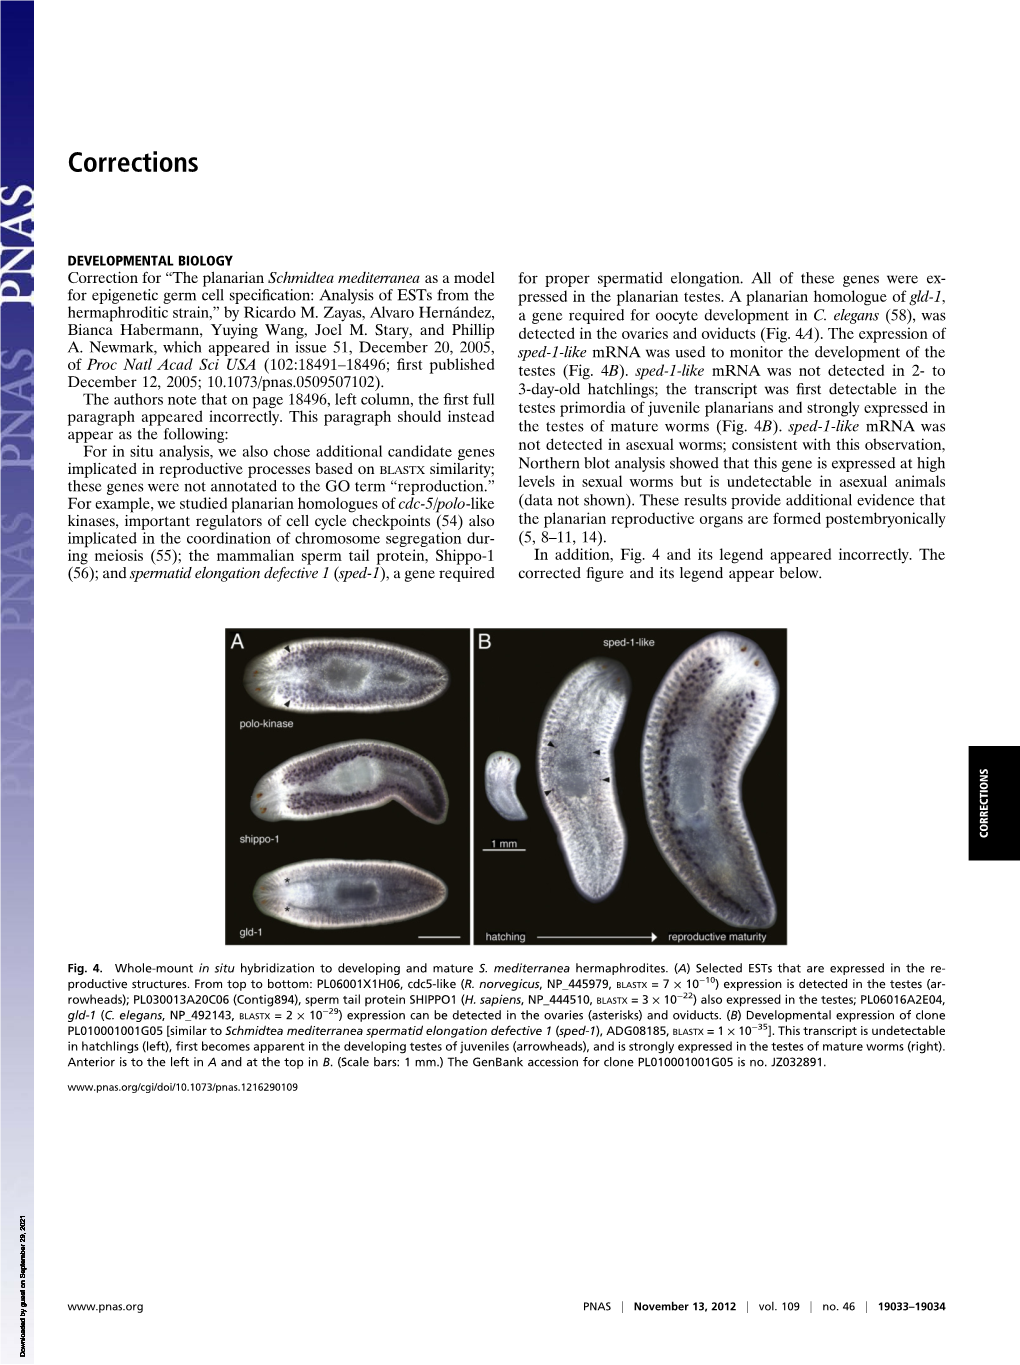 The Planarian Schmidtea Mediterranea As a Model for Epigenetic Germ Cell Specification: Analysis of Ests from the Hermaphroditic Strain